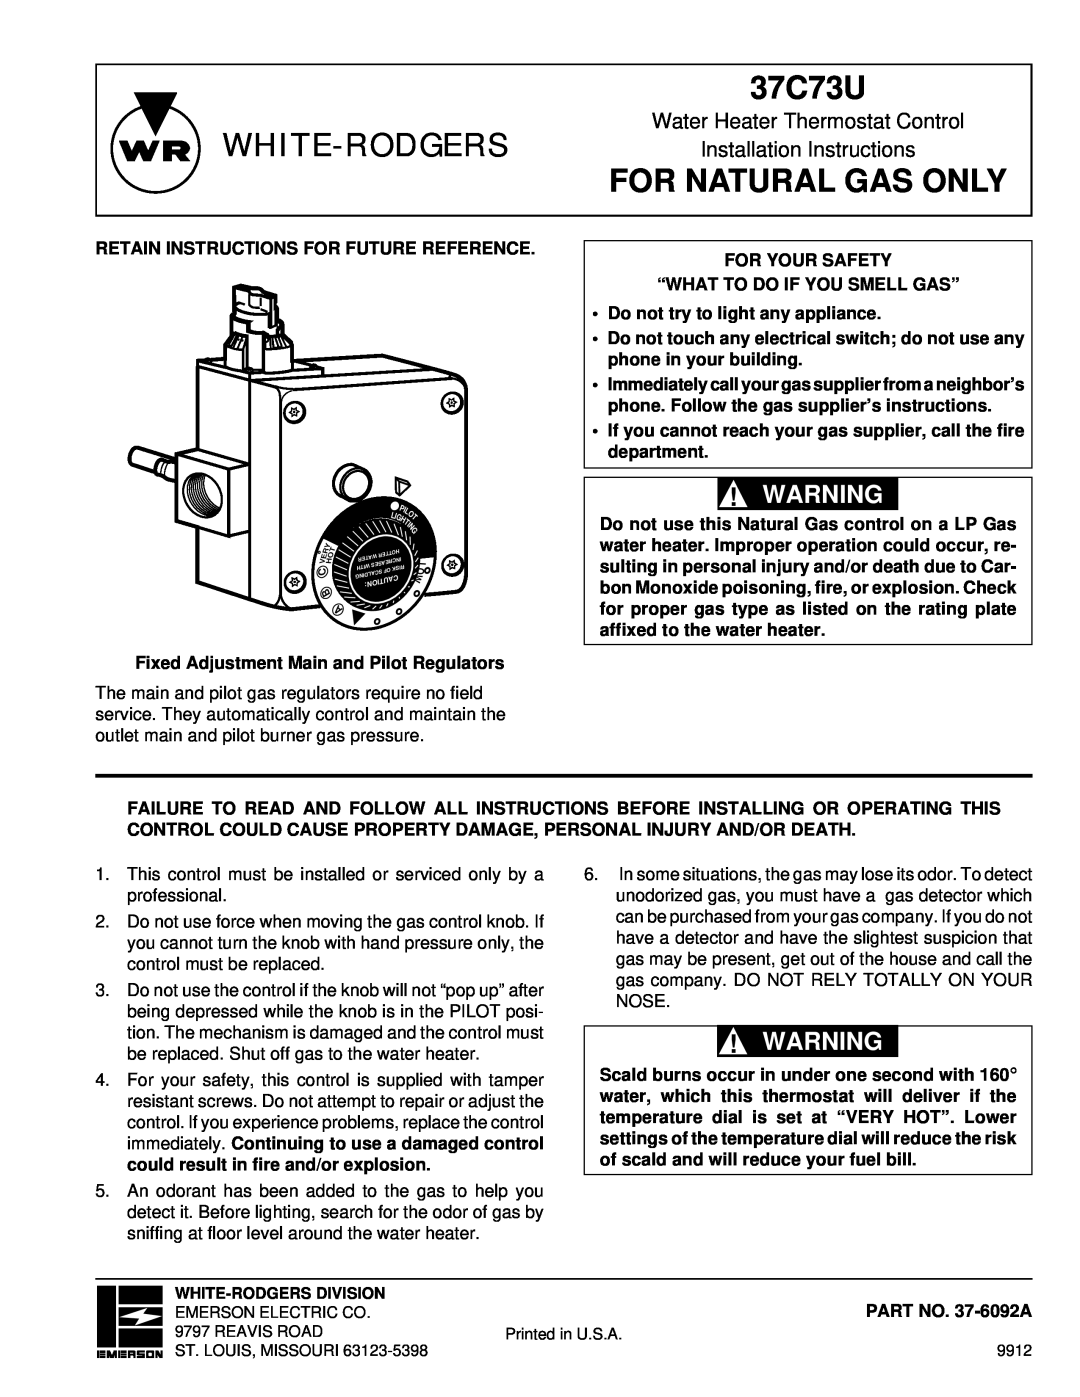 White Rodgers 37C73U installation instructions White-Rodgers, For Natural Gas Only, Water Heater Thermostat Control 